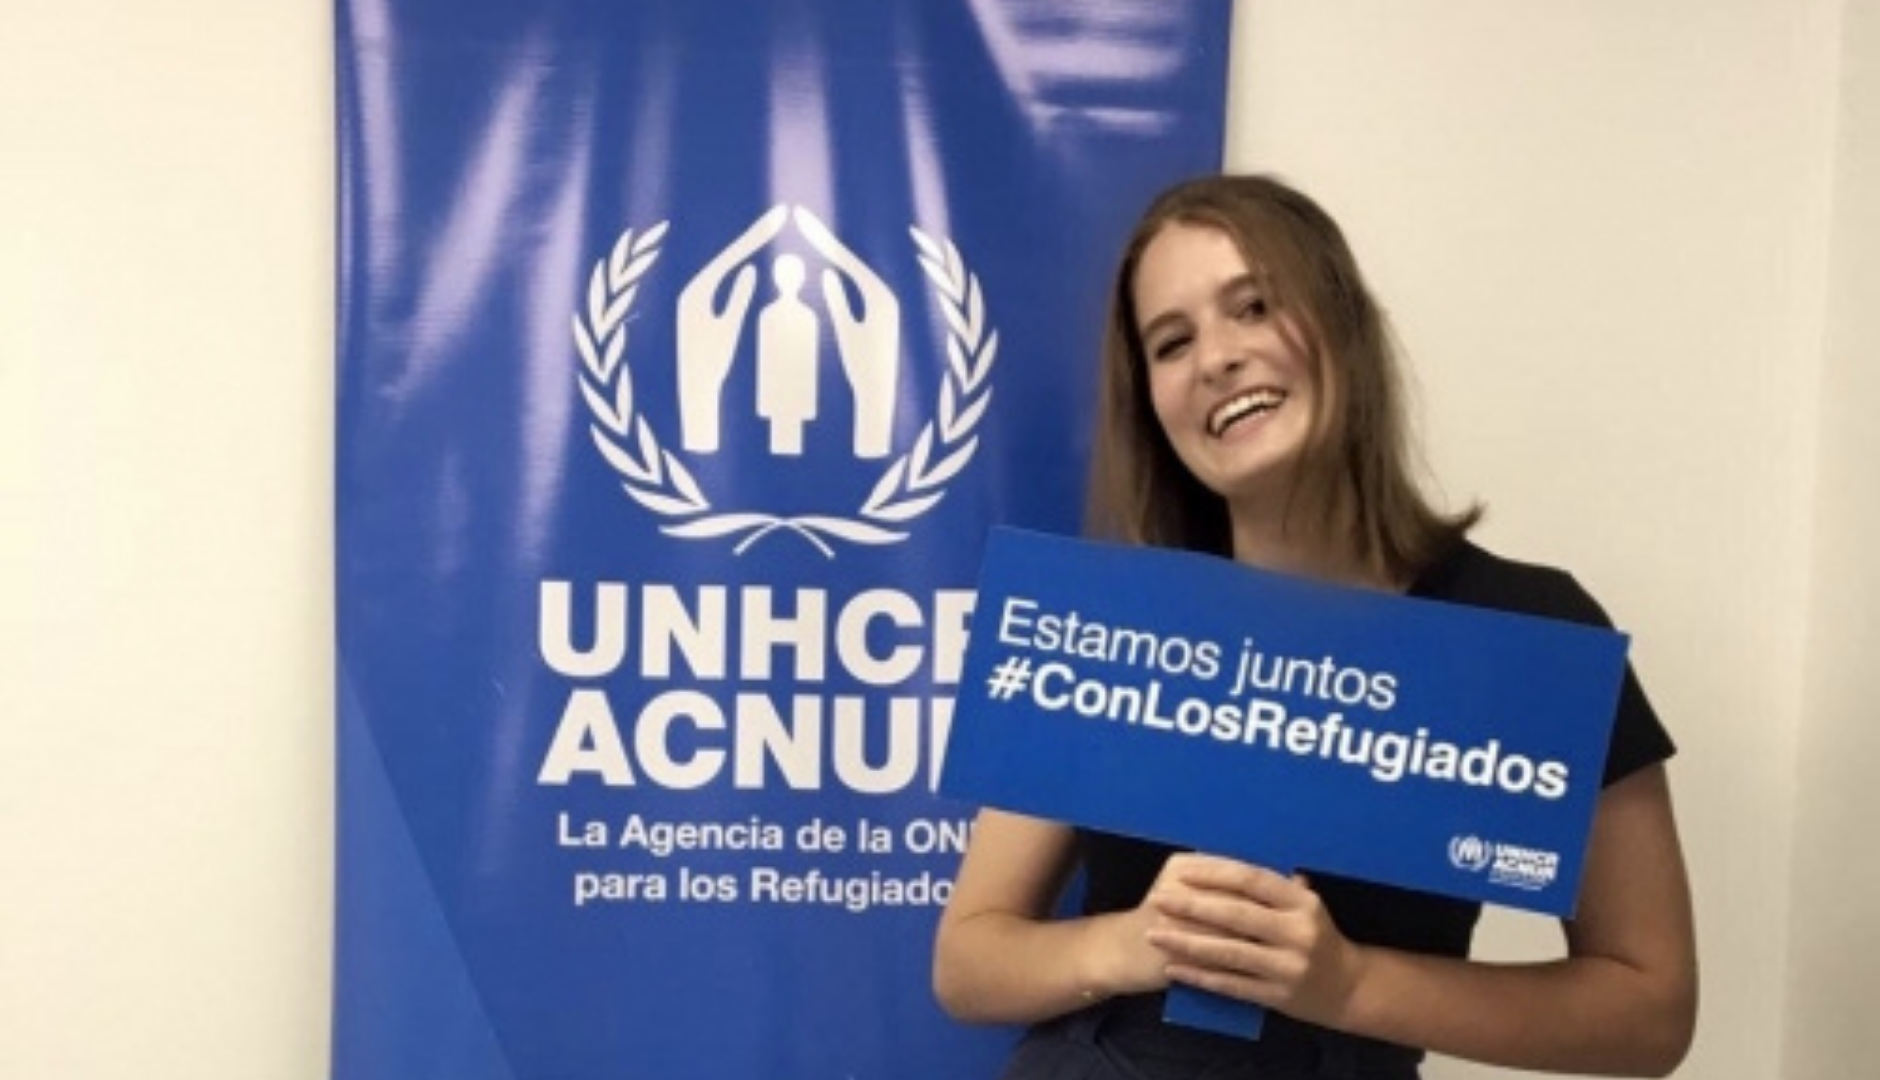 Julia standing in front of the UNHCR logo, holding a sign saying "we are with the refugees" in Spanish